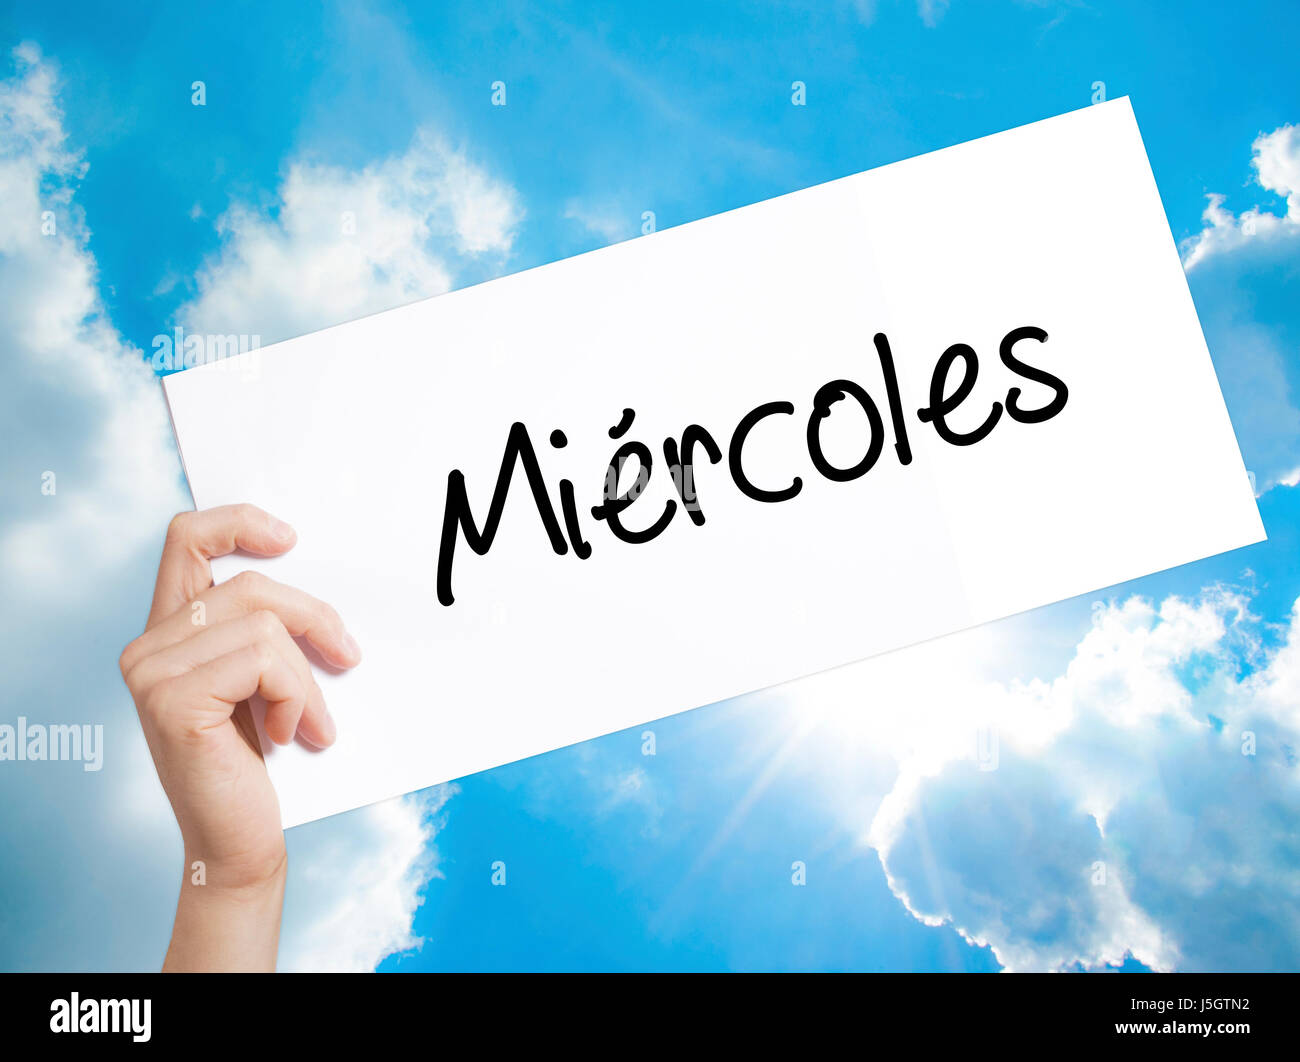 Miercoles (Wednesday in Spanish) Sign on white paper. Man Hand Holding  Paper with text. Isolated on sky background. Business concept. Stock Photo  Stock Photo - Alamy